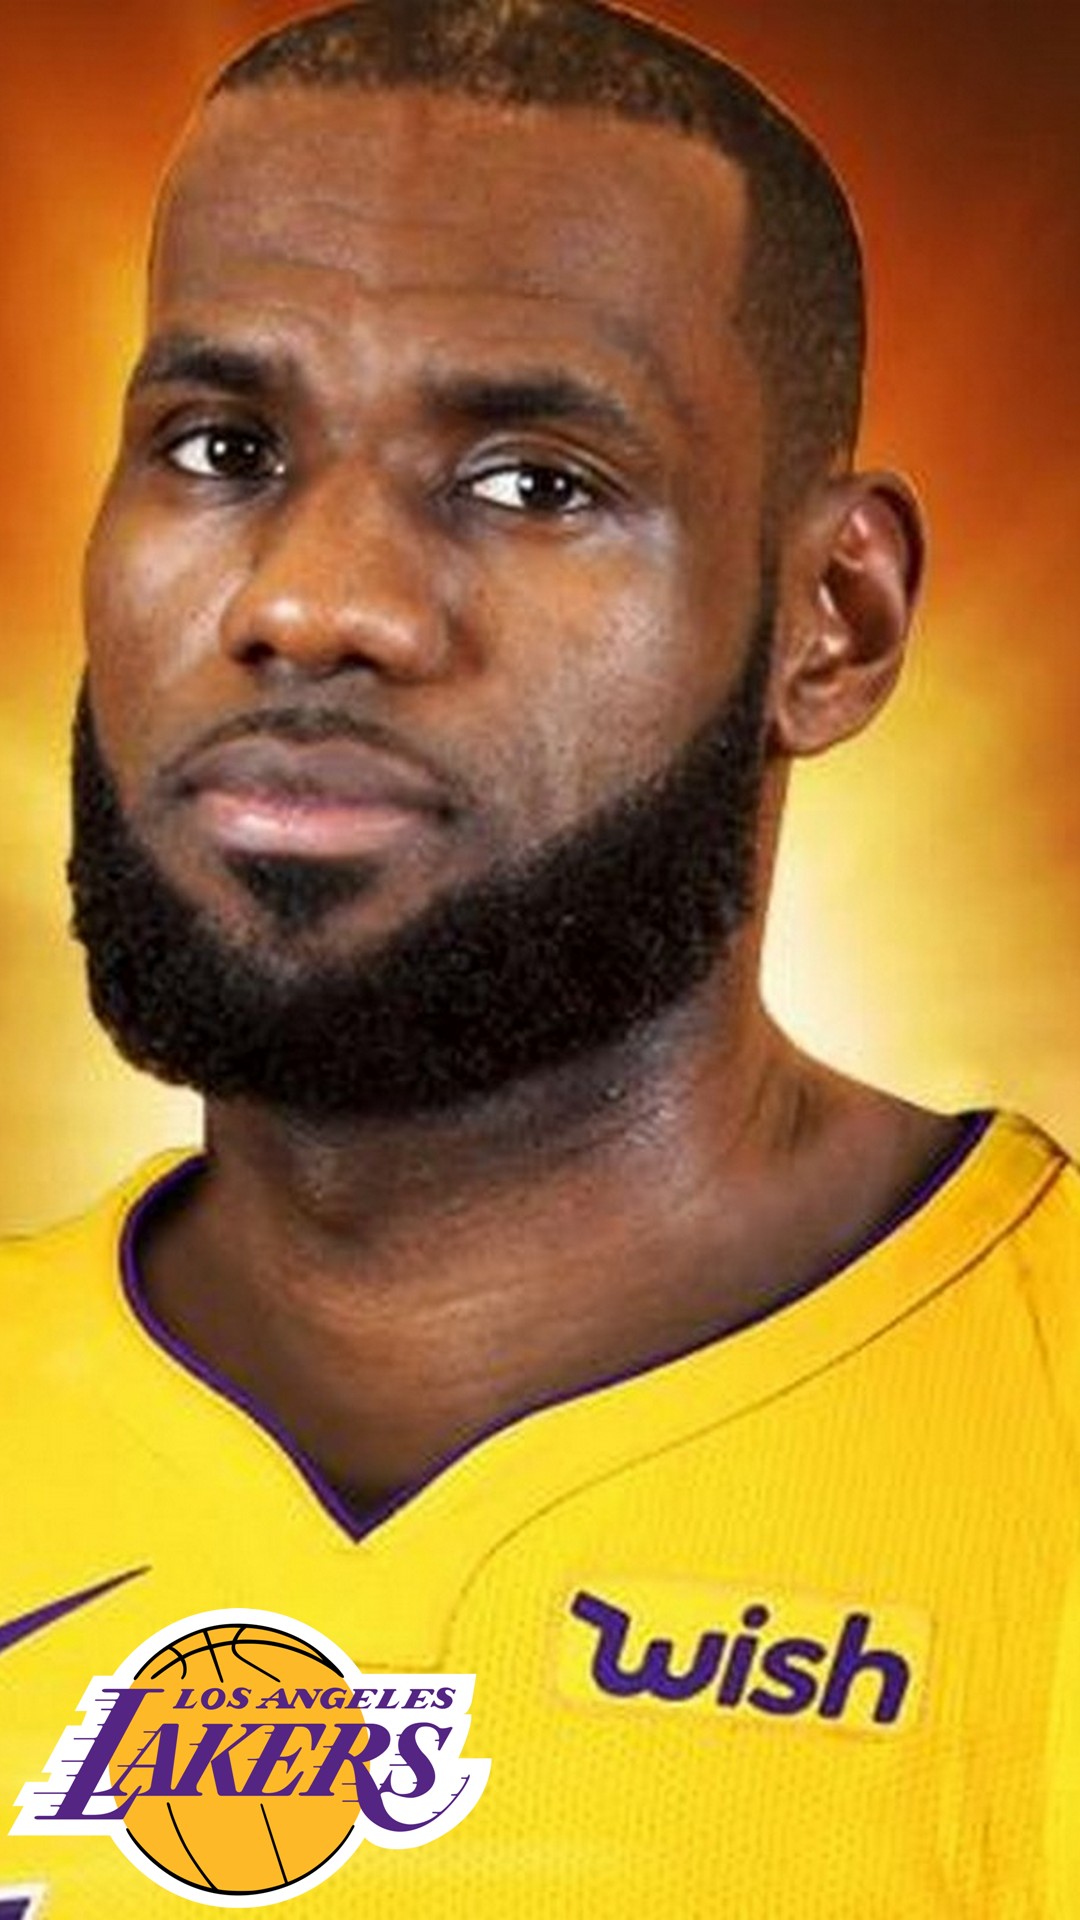 La Lakers Lebron James Iphone X Wallpaper With Image - Angeles Lakers - HD Wallpaper 